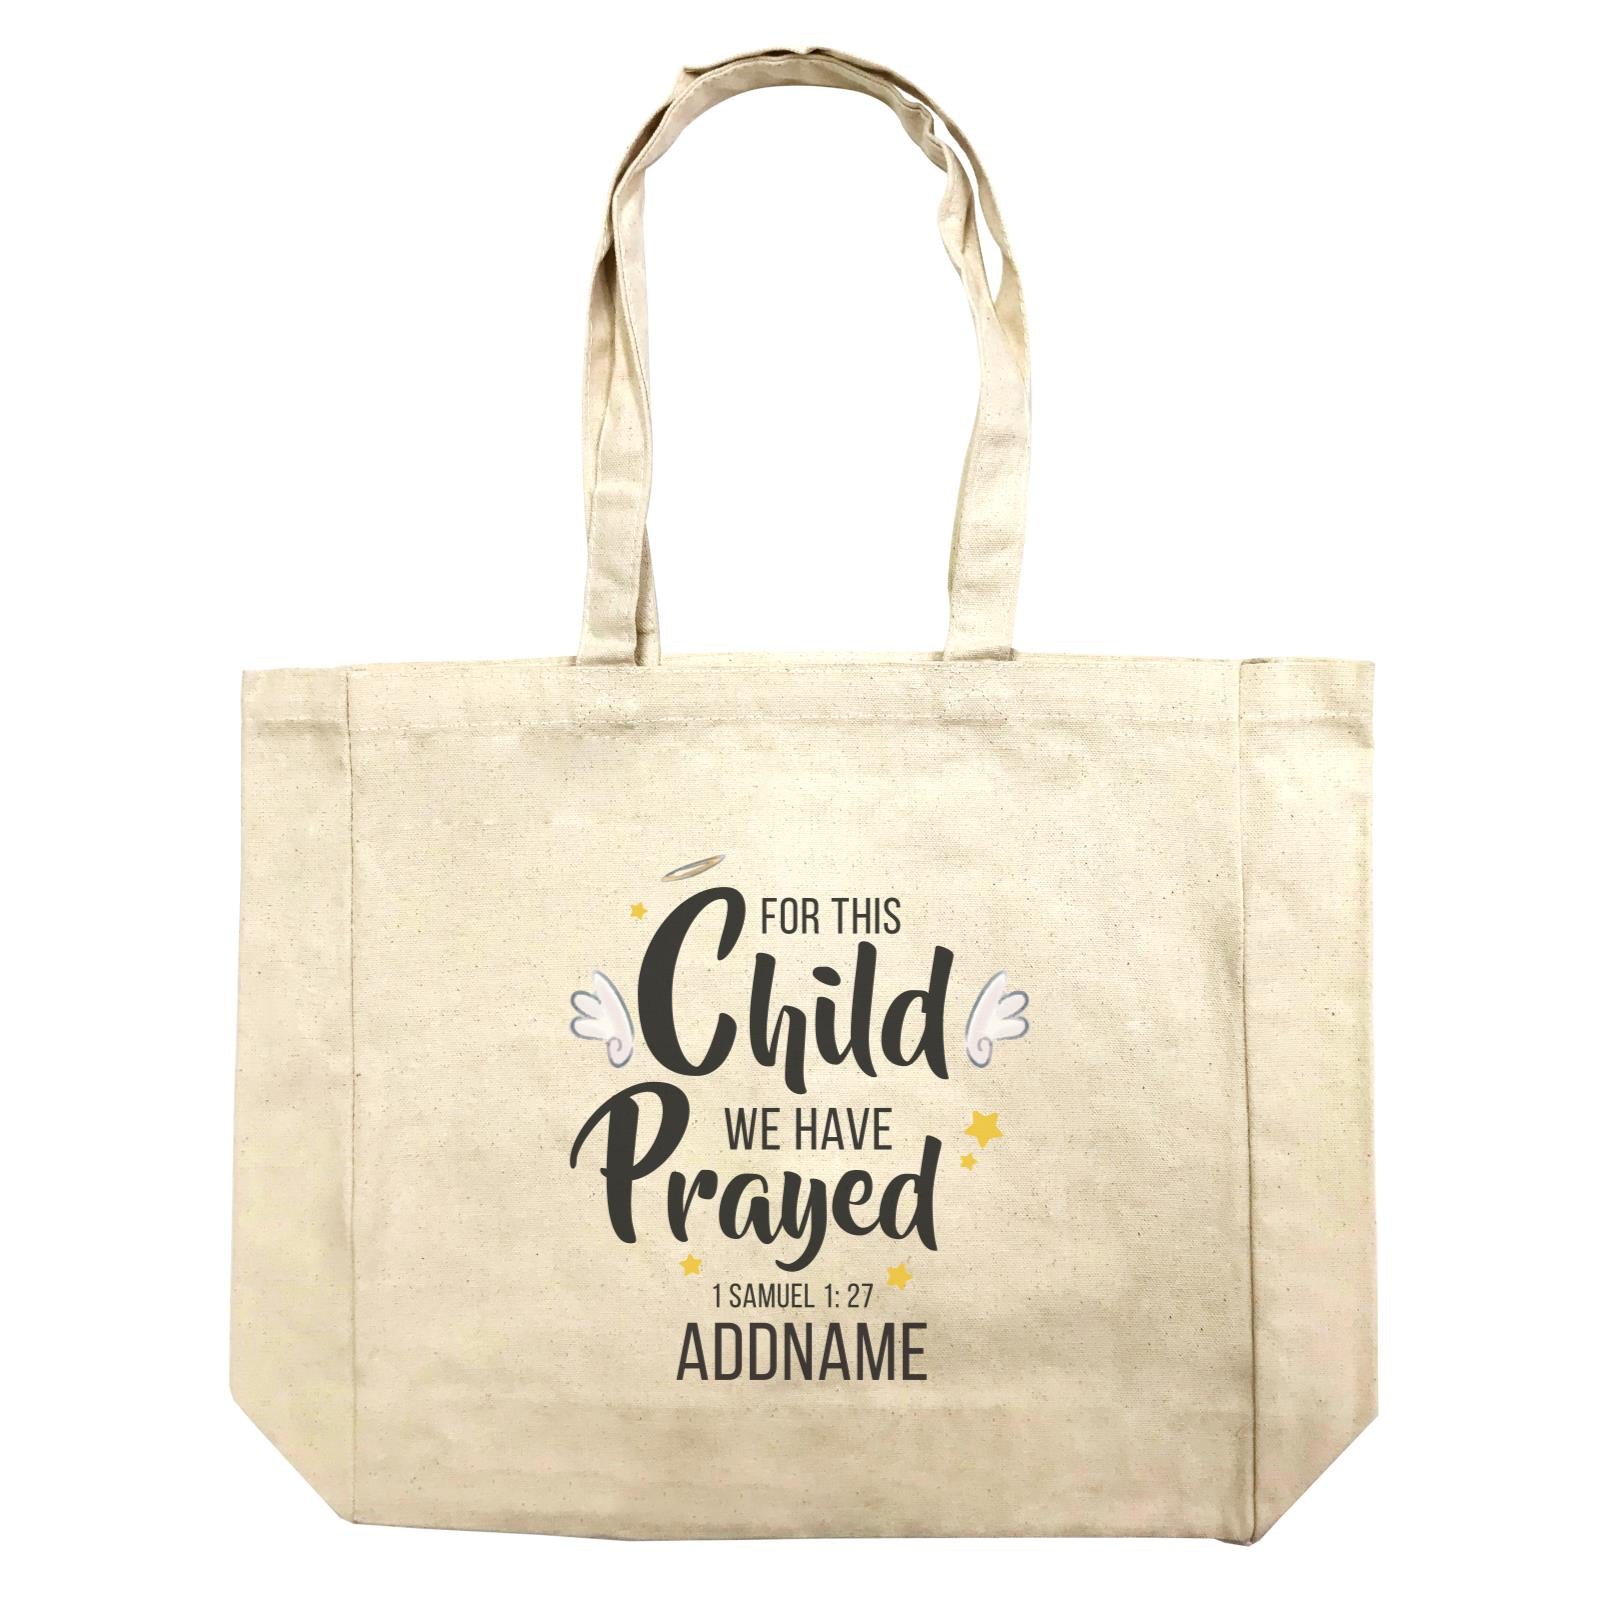 Gods Gift For This Child We Have Prayed 1 Samuel 1.27 Addname Shopping Bag